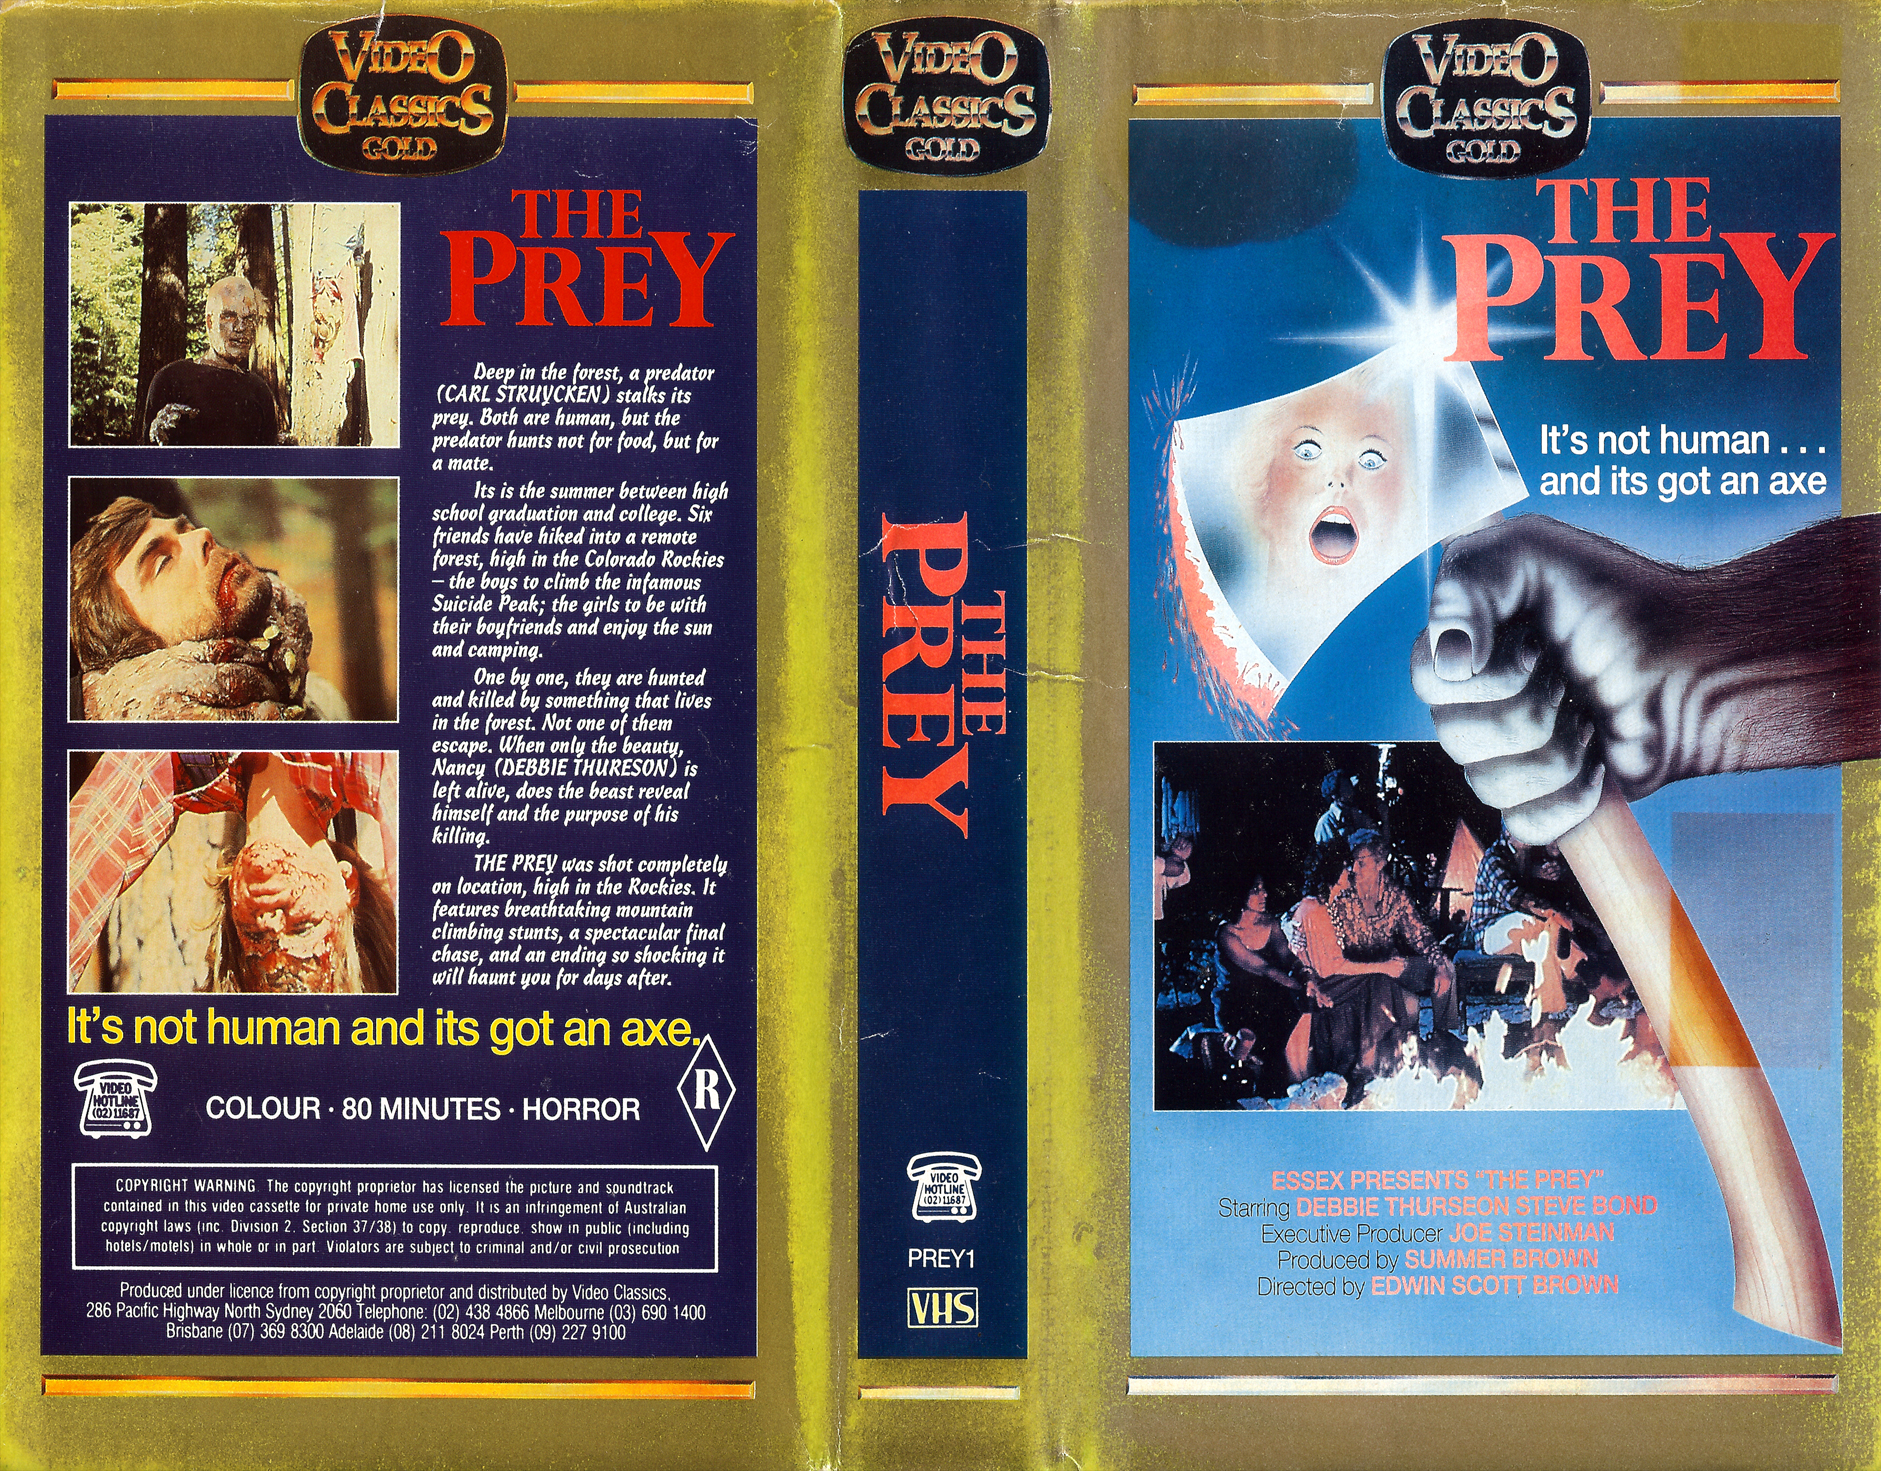 April 21 2016 VHS cover scan - click for high res version the prey - submit...